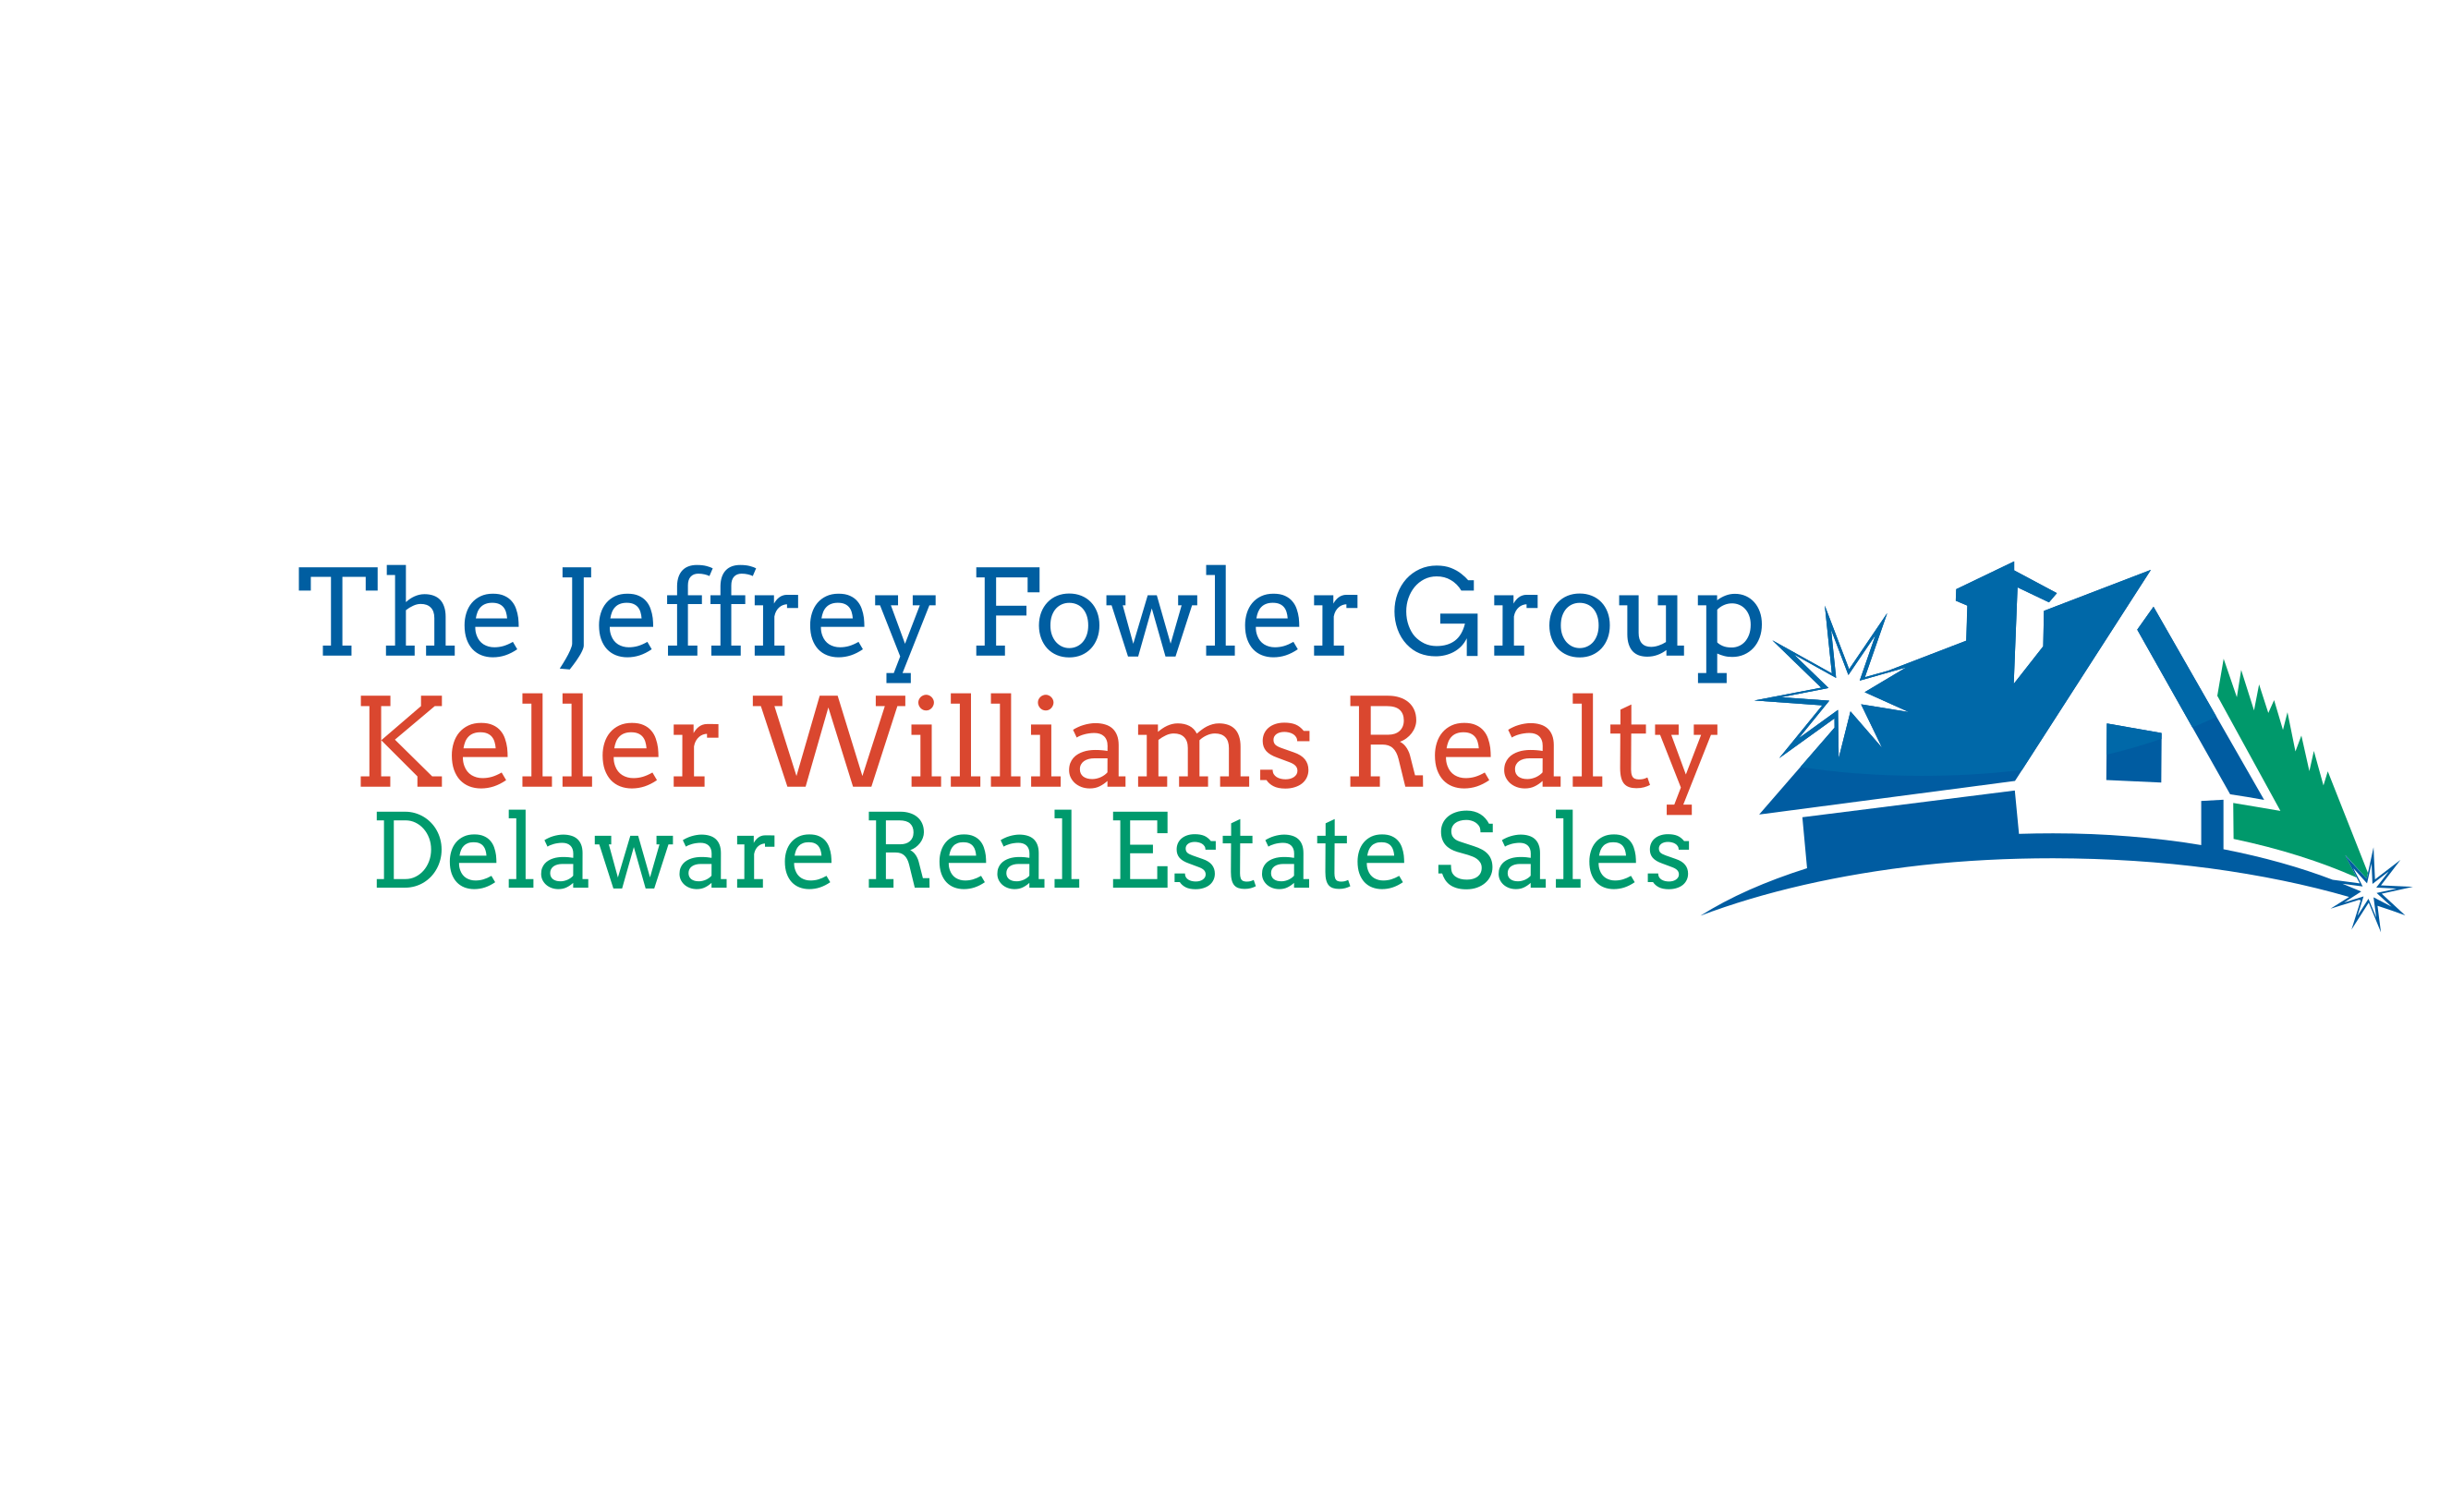 Welcome to the Jeffrey Fowler Group